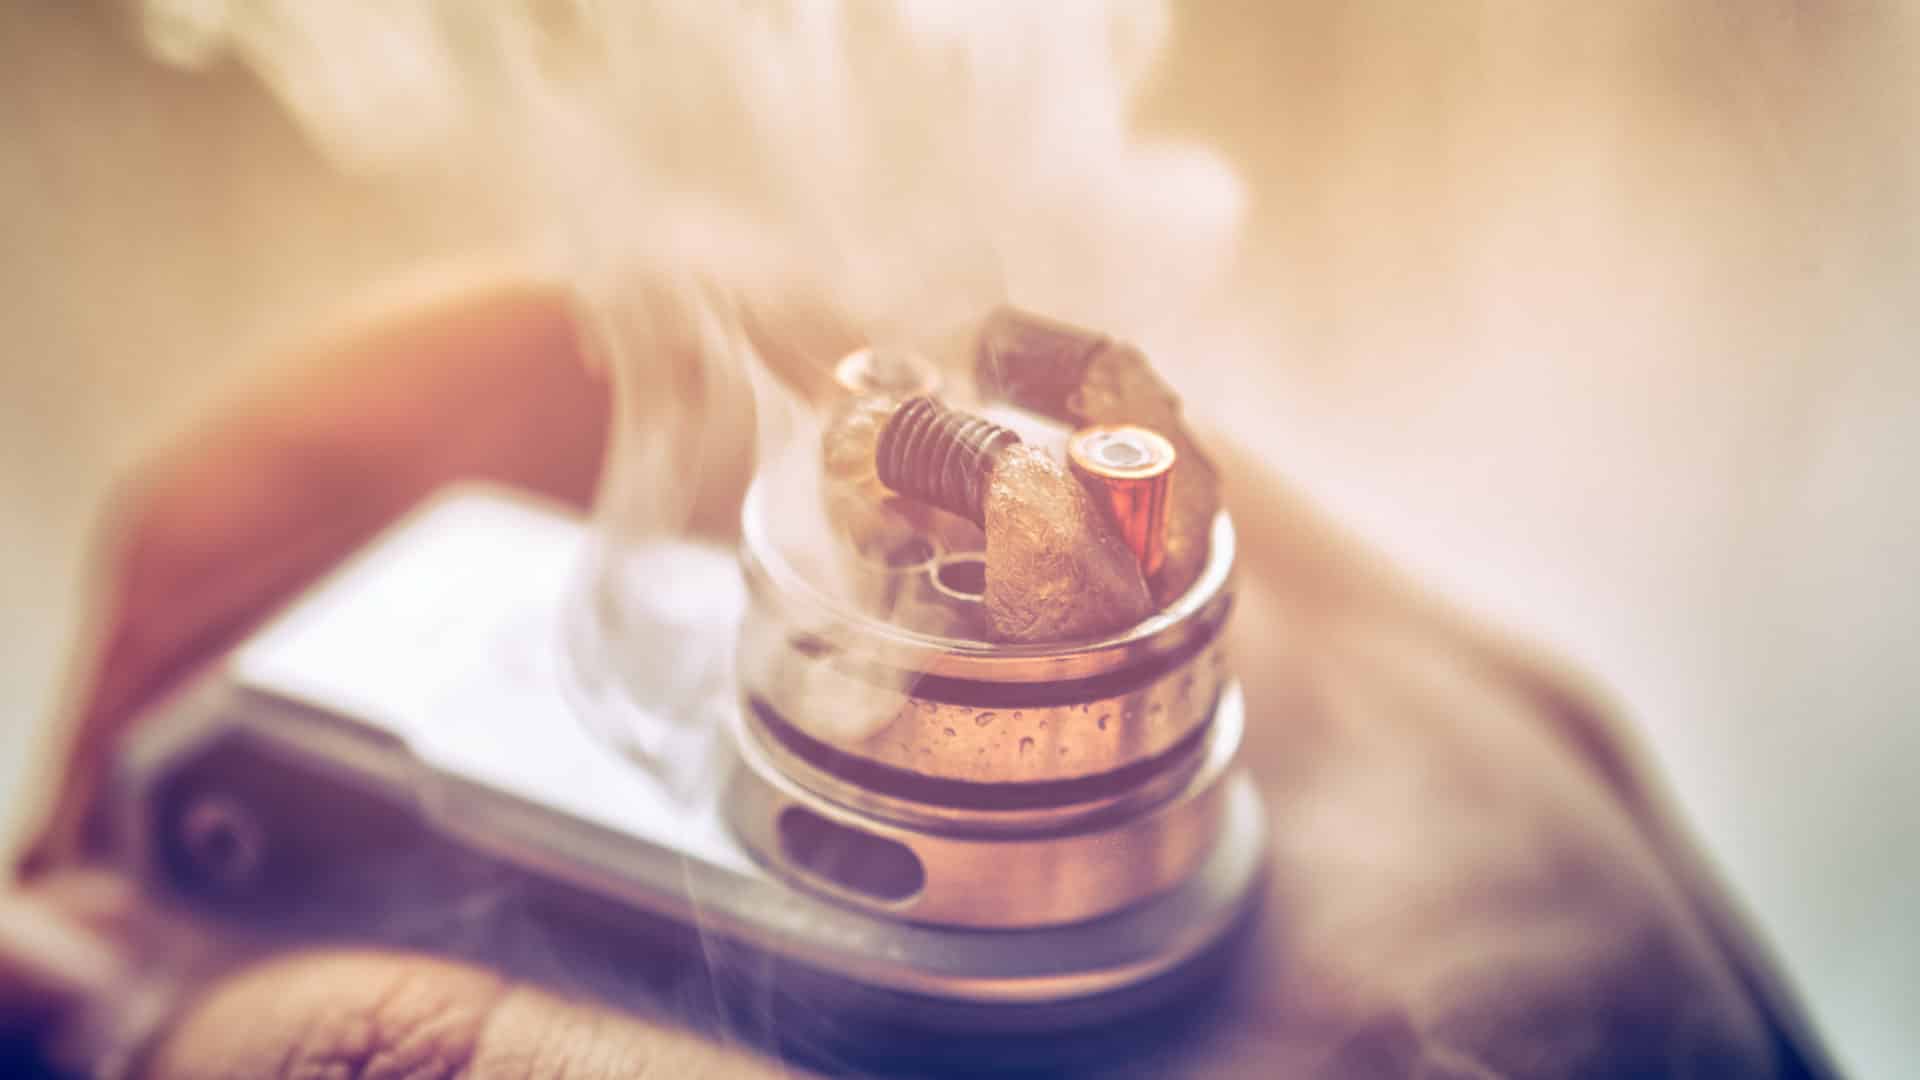 E-cigarette coil overheating before causing a battery explosion